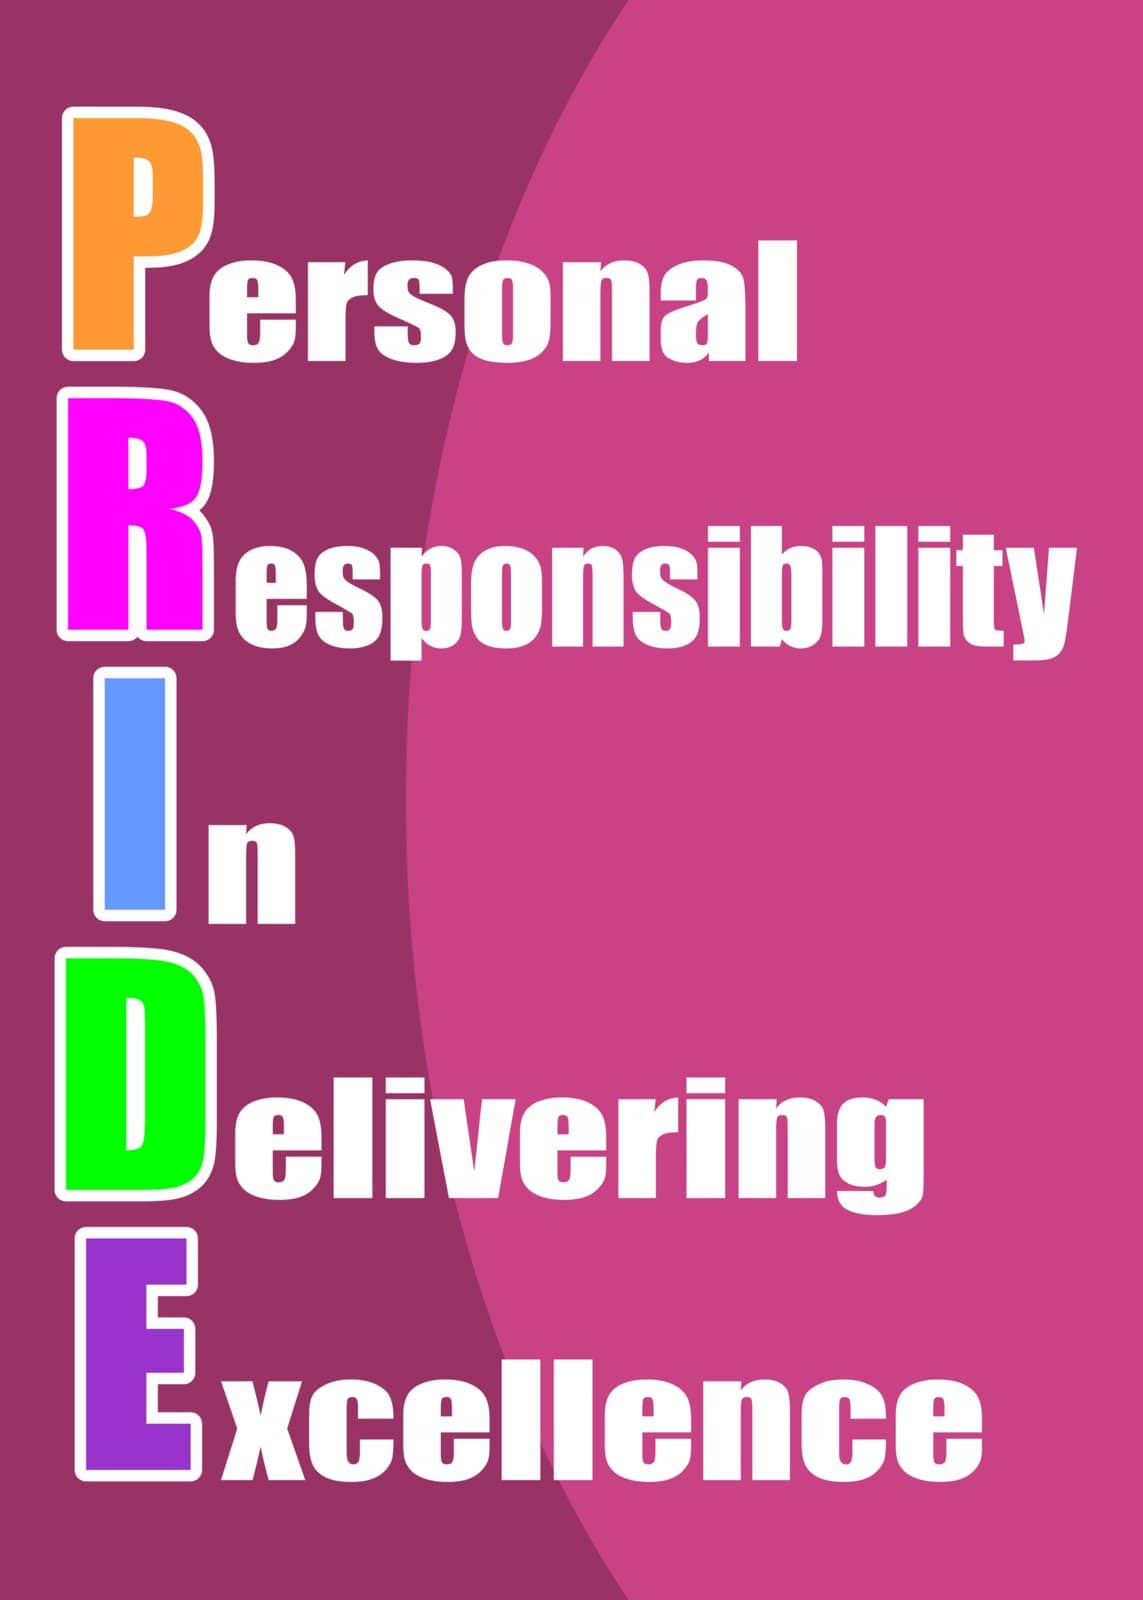 PRIDE (personal responsibility in delivering excellence) concept presented in a poster